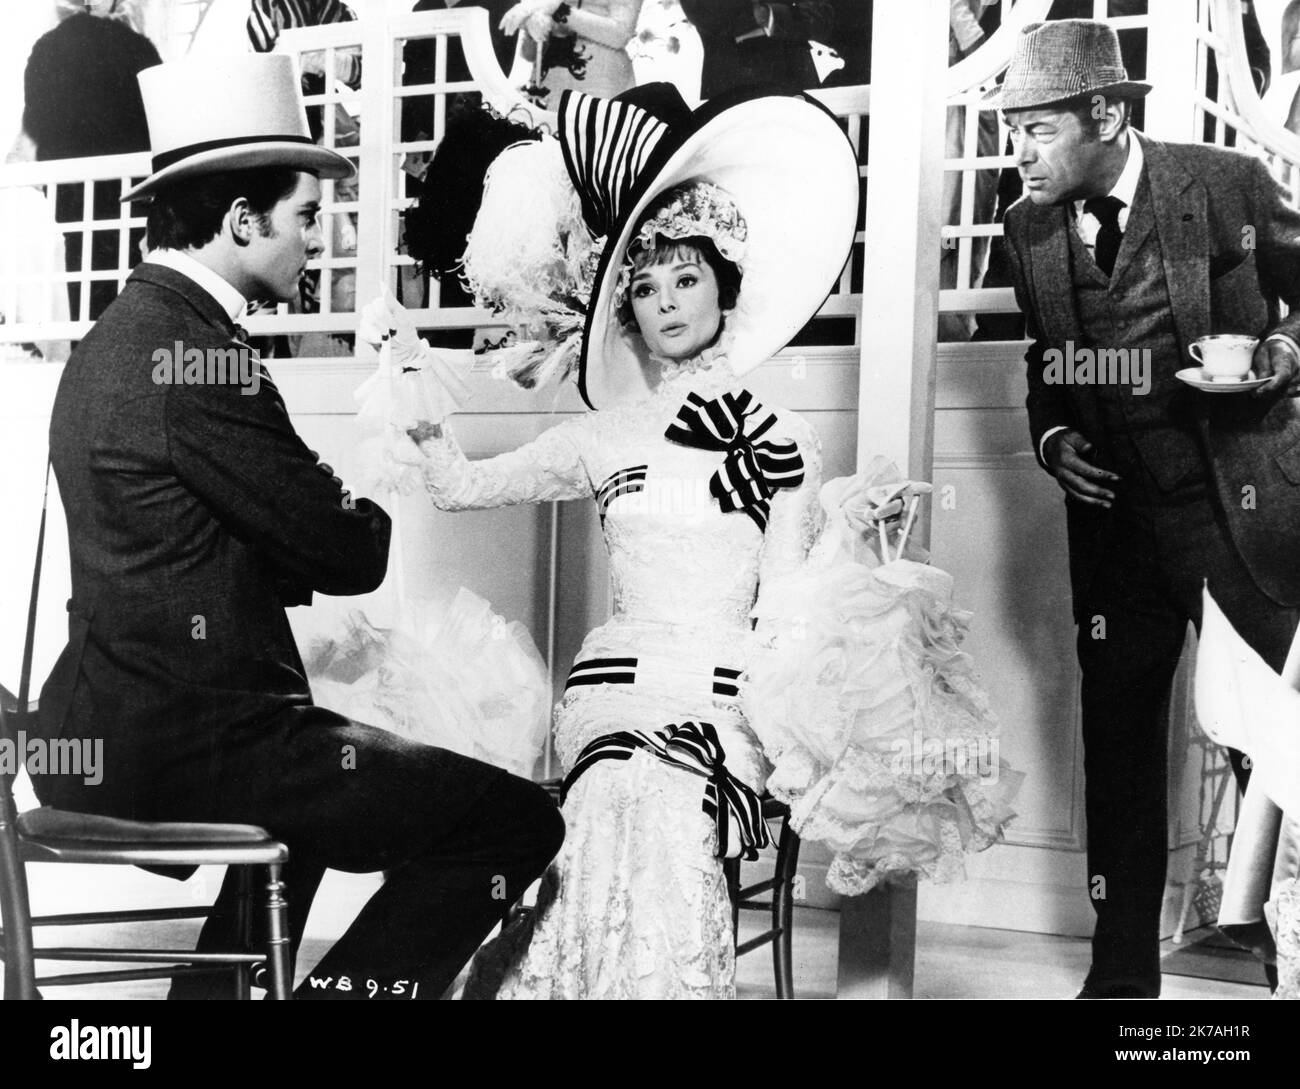 JEREMY BRETT AUDREY HEPBURN and REX HARRISON in MY FAIR LADY 1964 director GEORGE CUKOR from the Broadway musical adapted from the play Pygmalion by George Bernard Shaw screenplay book and lyrics Alan Jay Lerner music Frederick Loewe production design and costumes Cecil Beaton producer Jack L. Warner Warner Bros. Stock Photo